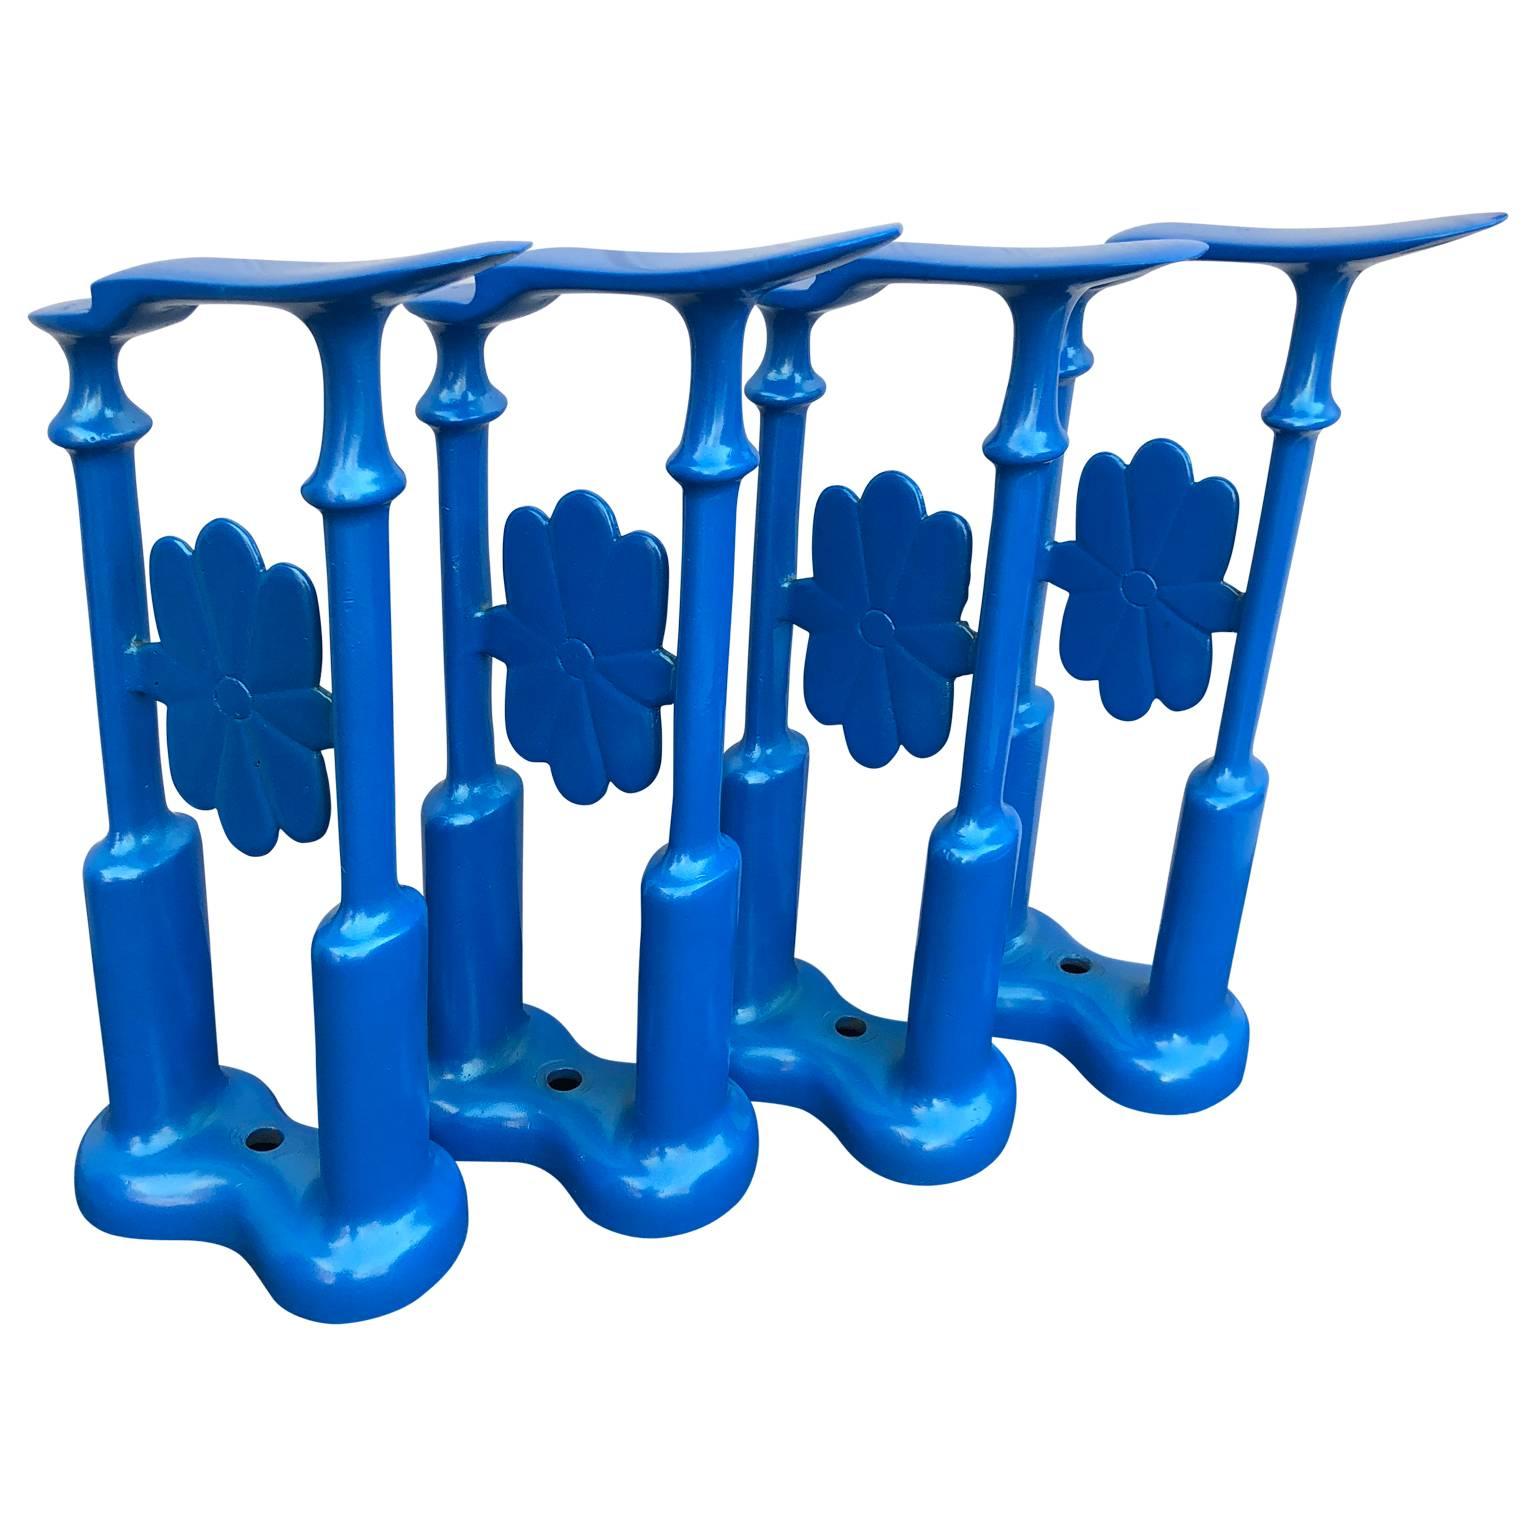 American Set Of Four Decorative Blue Powder-Coated Cast Iron Shoe-Shine Stands